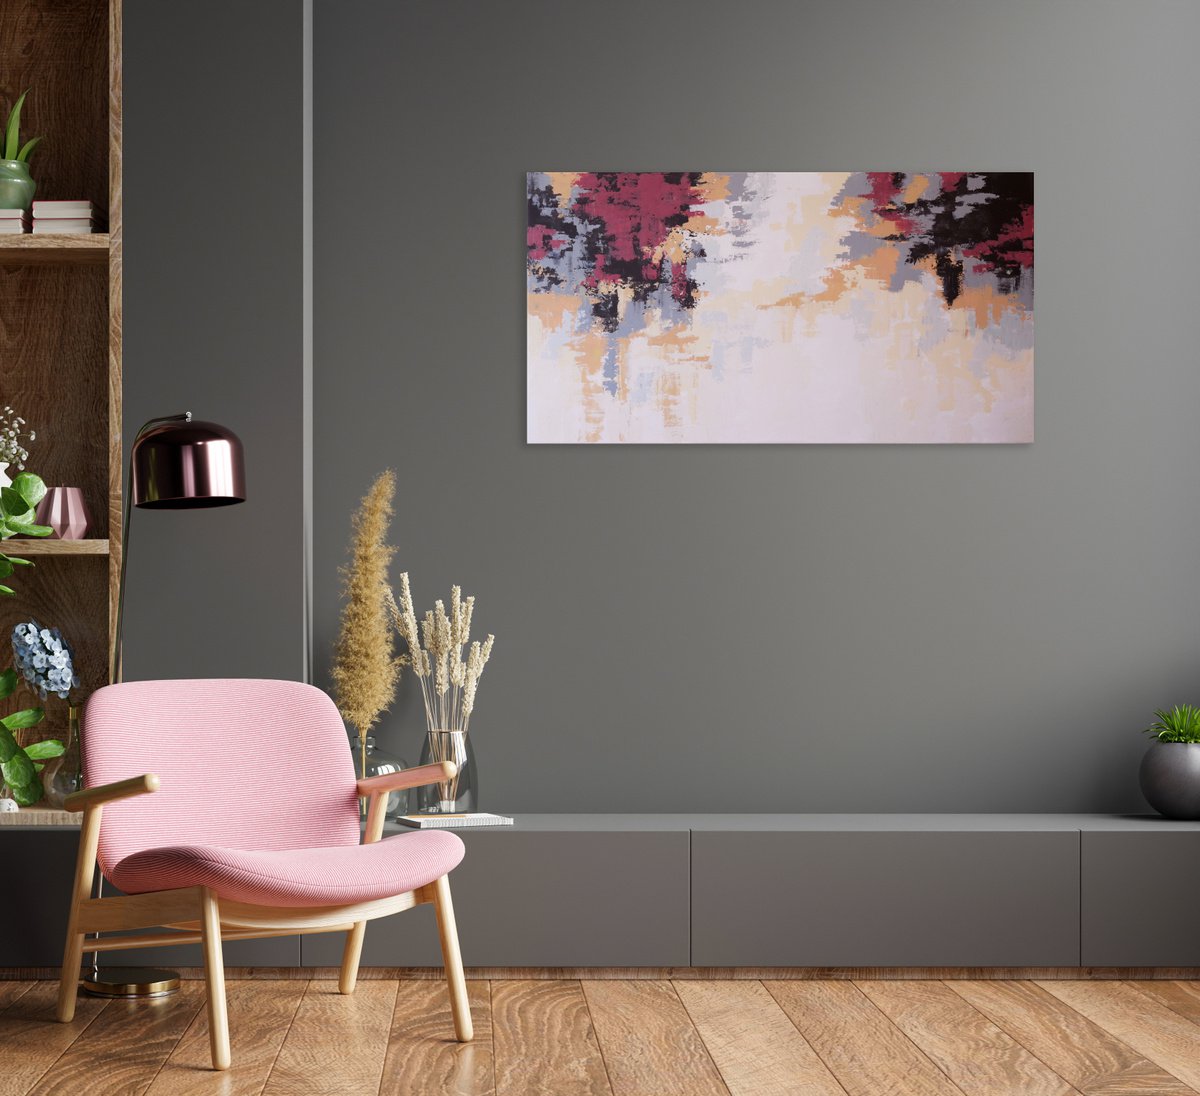 Blush Pink and Dusky Maroon by Hannah Bruce